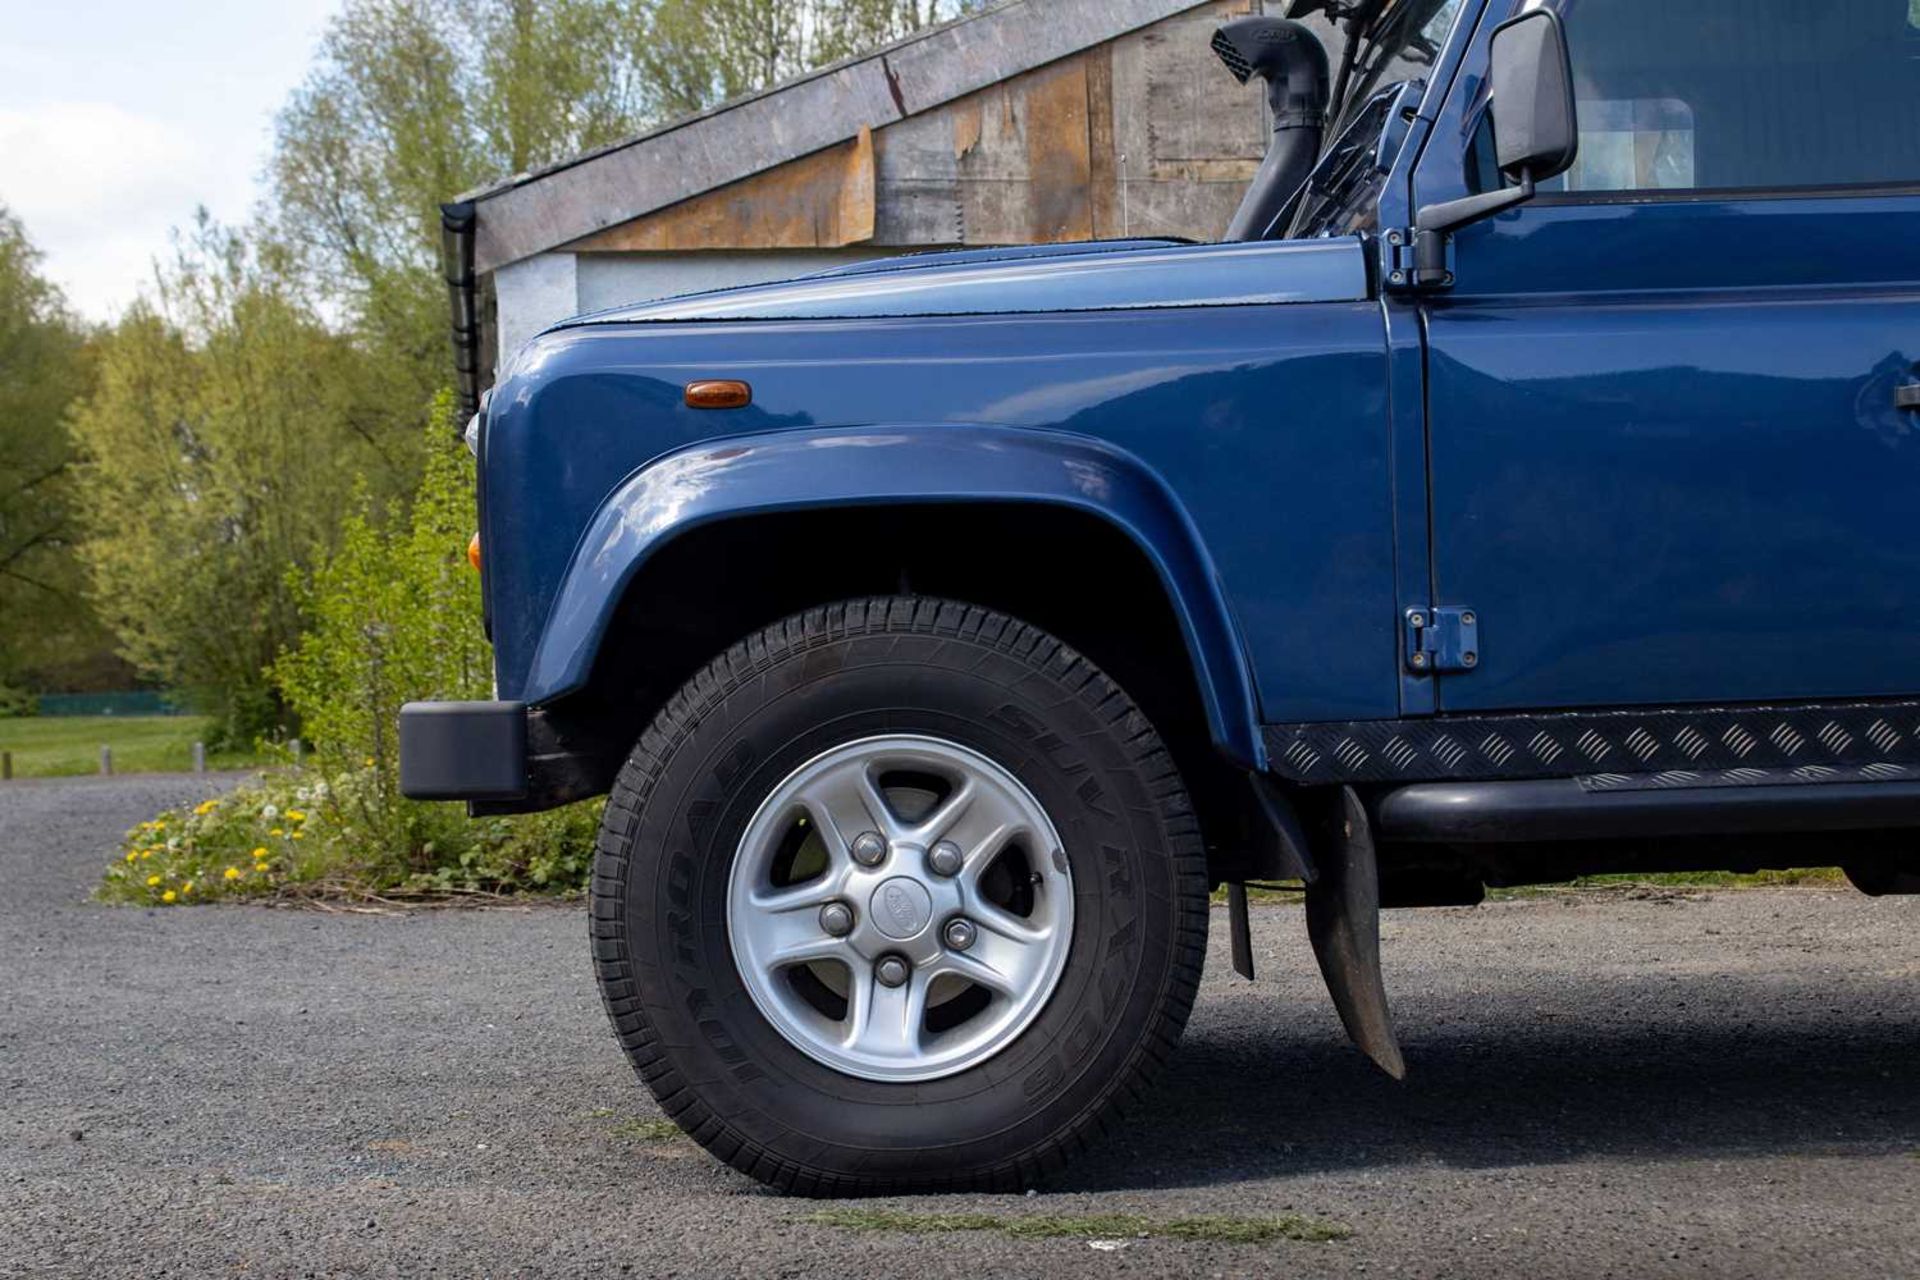 2007 Land Rover Defender 90 County  Powered by the 2.4-litre TDCi unit and features numerous tastefu - Image 16 of 76